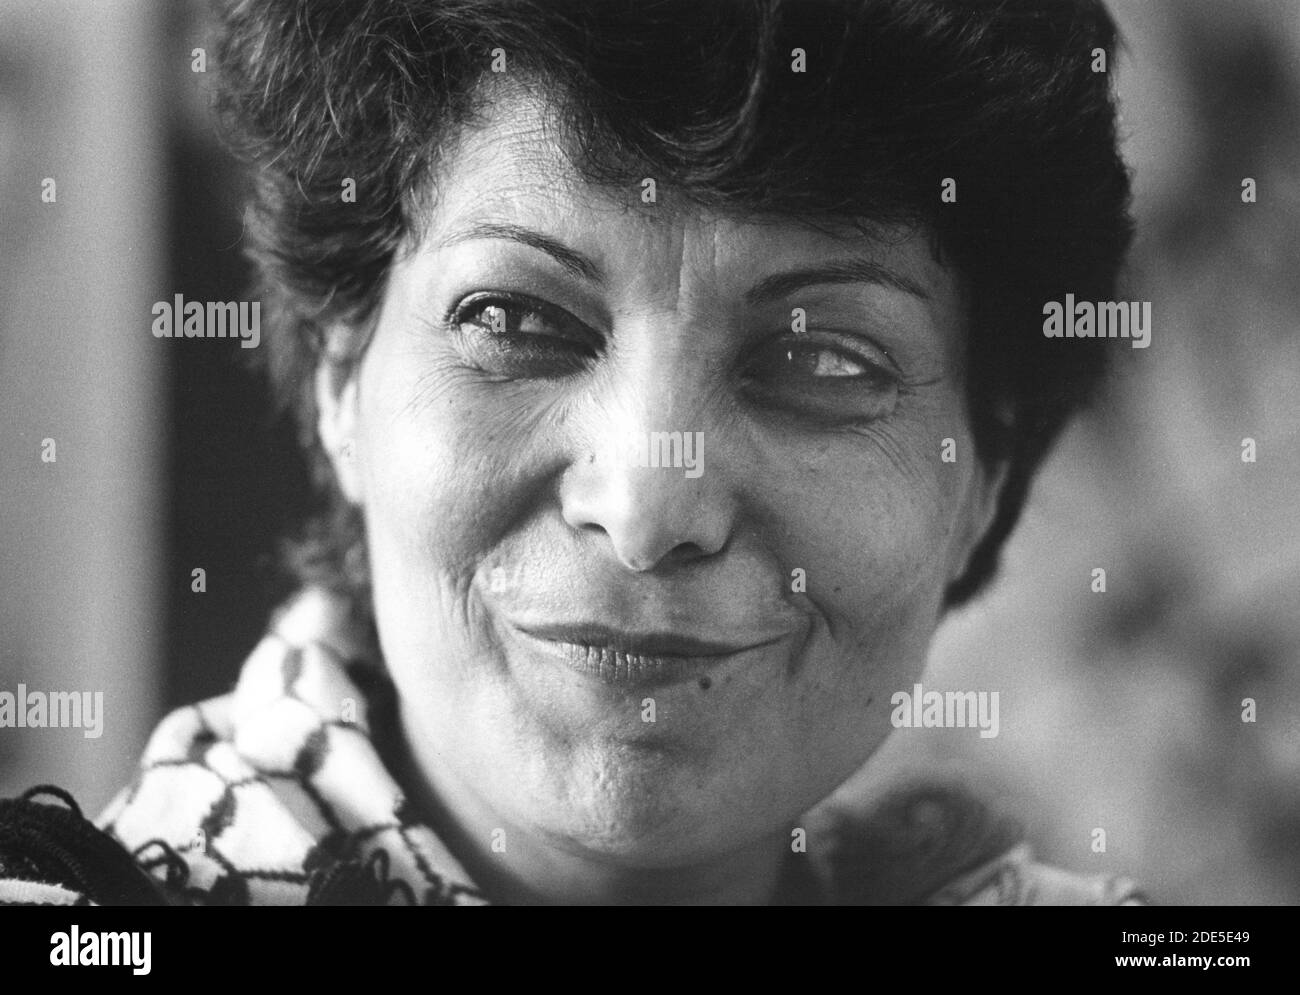 LEILA KHALED, former militant guerrilla, a member of the Palestinian National Council, member of the PFLP (Popular Front for the Liberation of Palestine). Leila Khaled became famous through airplane hijackings in 1969 and 1970. Photographed May 1988 in Tripolis, Libya. Stock Photo